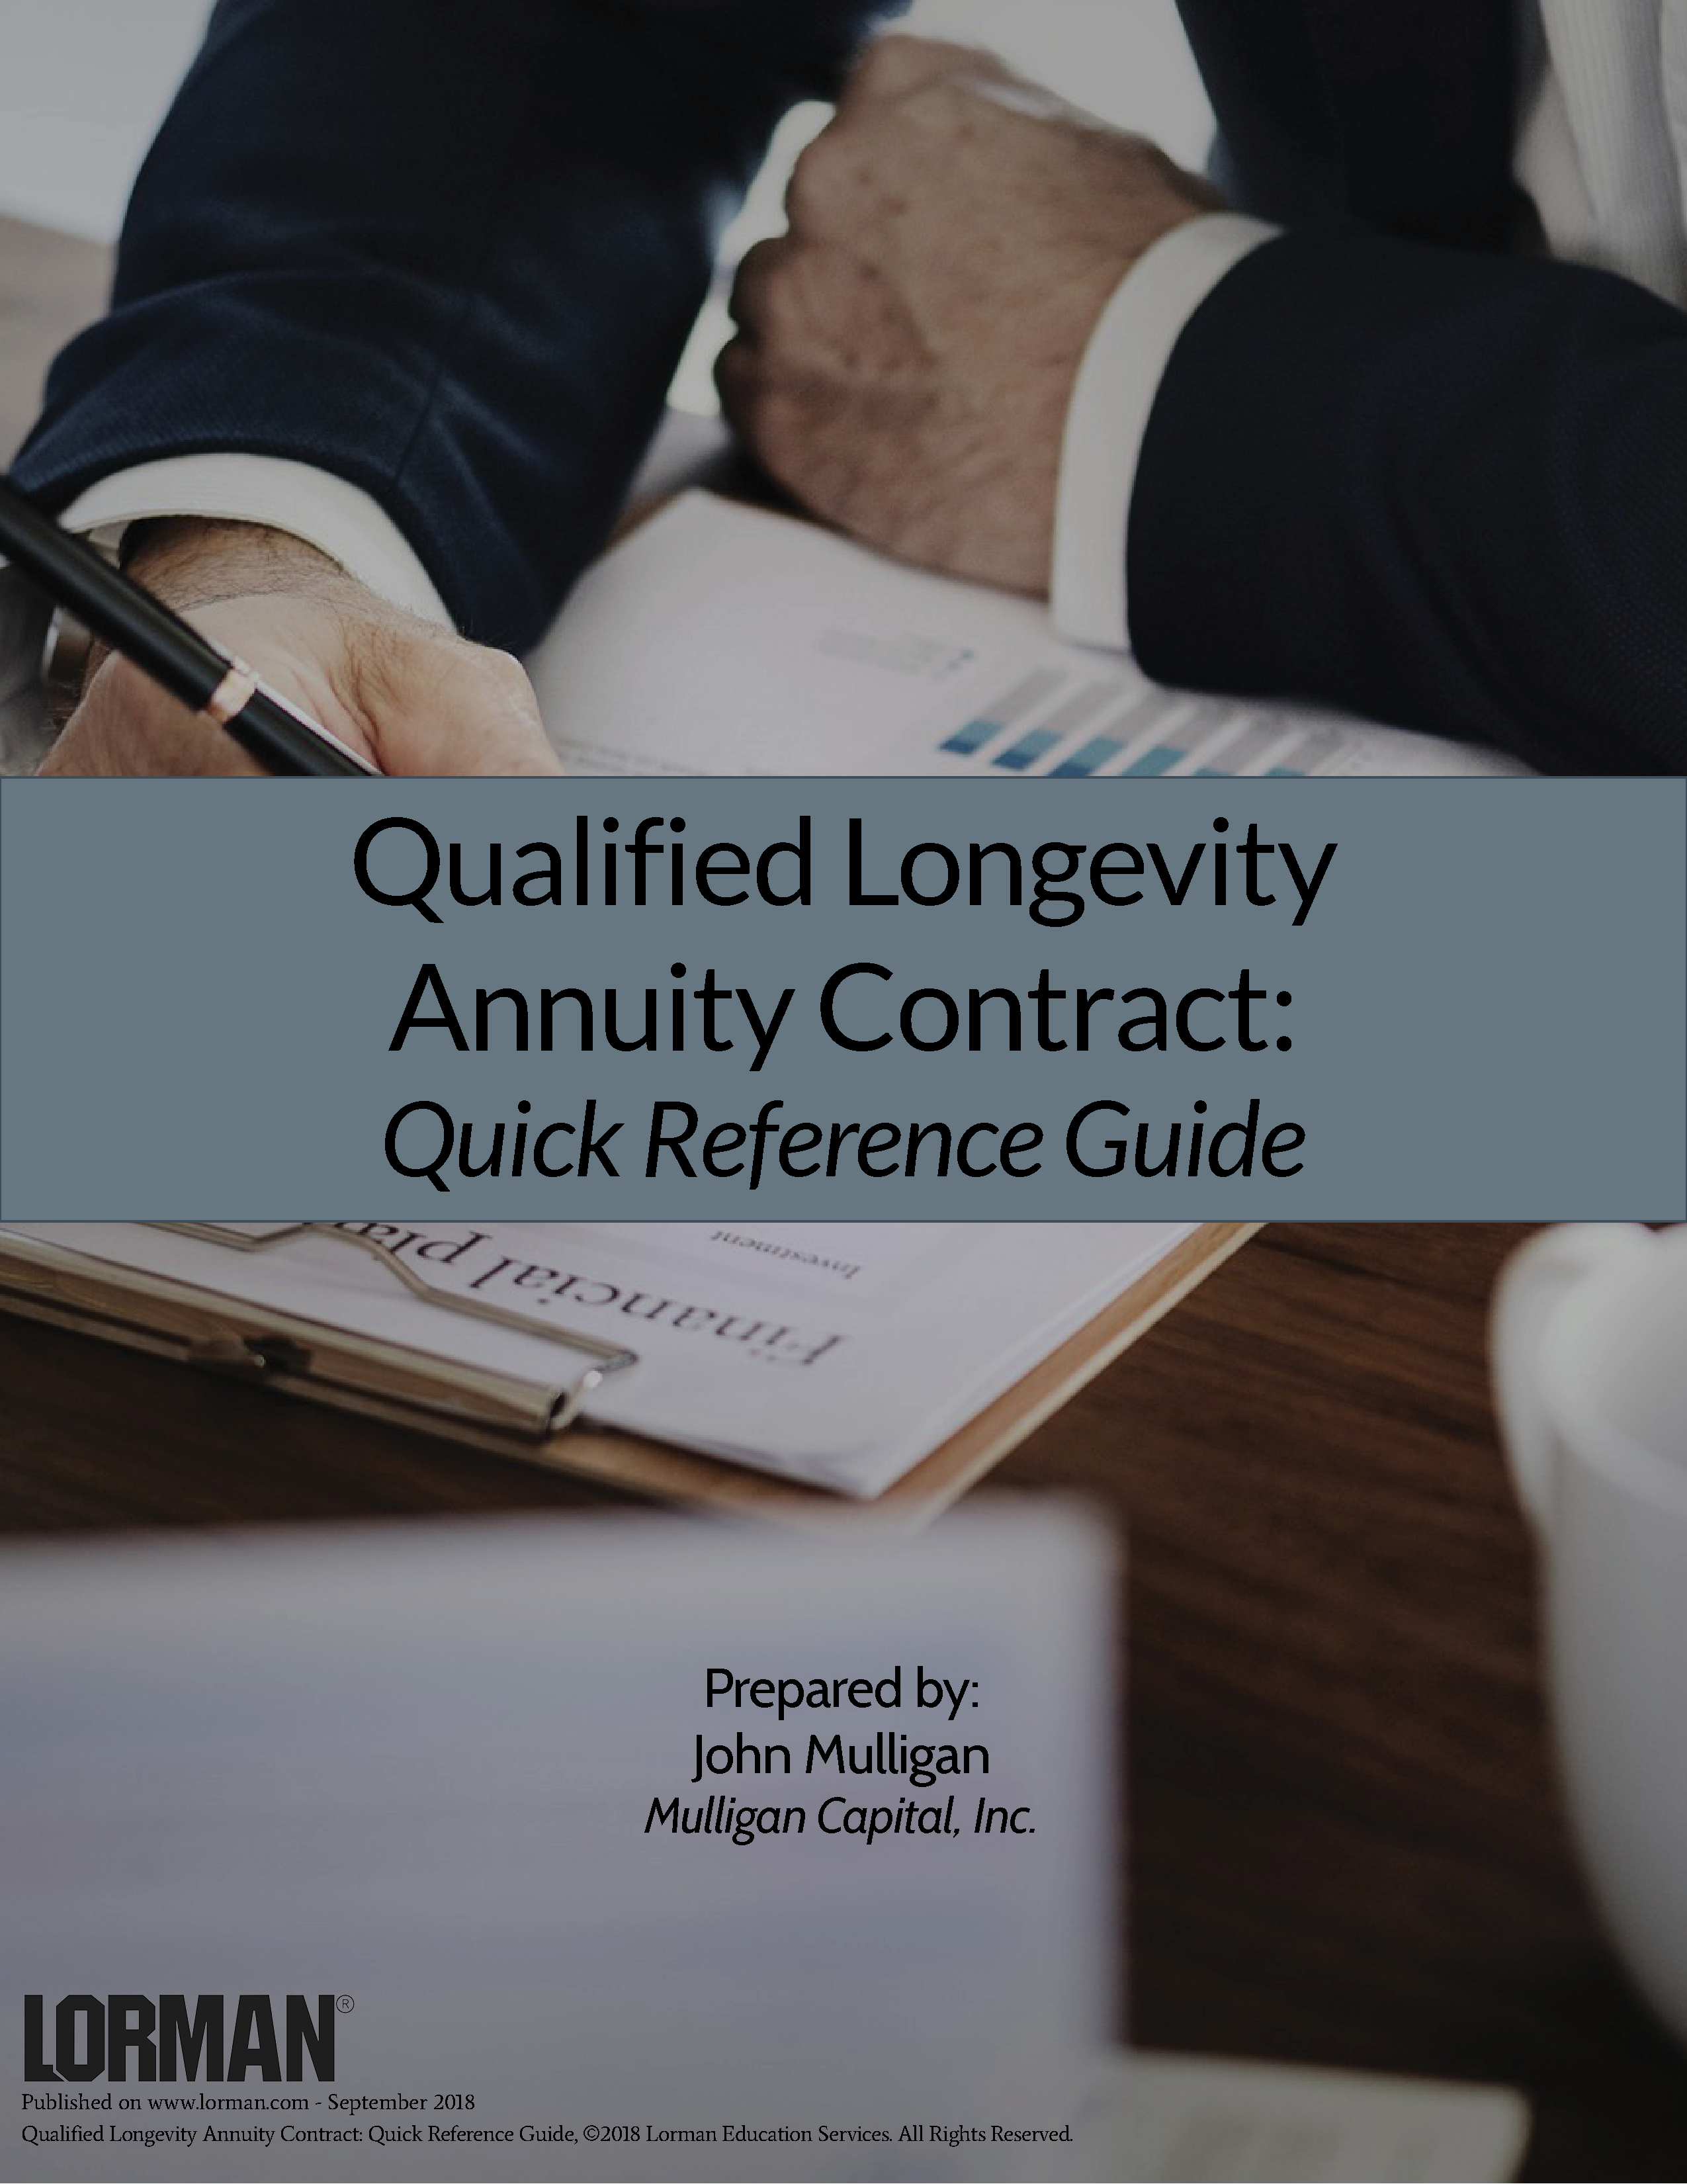 Qualified Longevity Annuity Contract: Quick Reference Guide